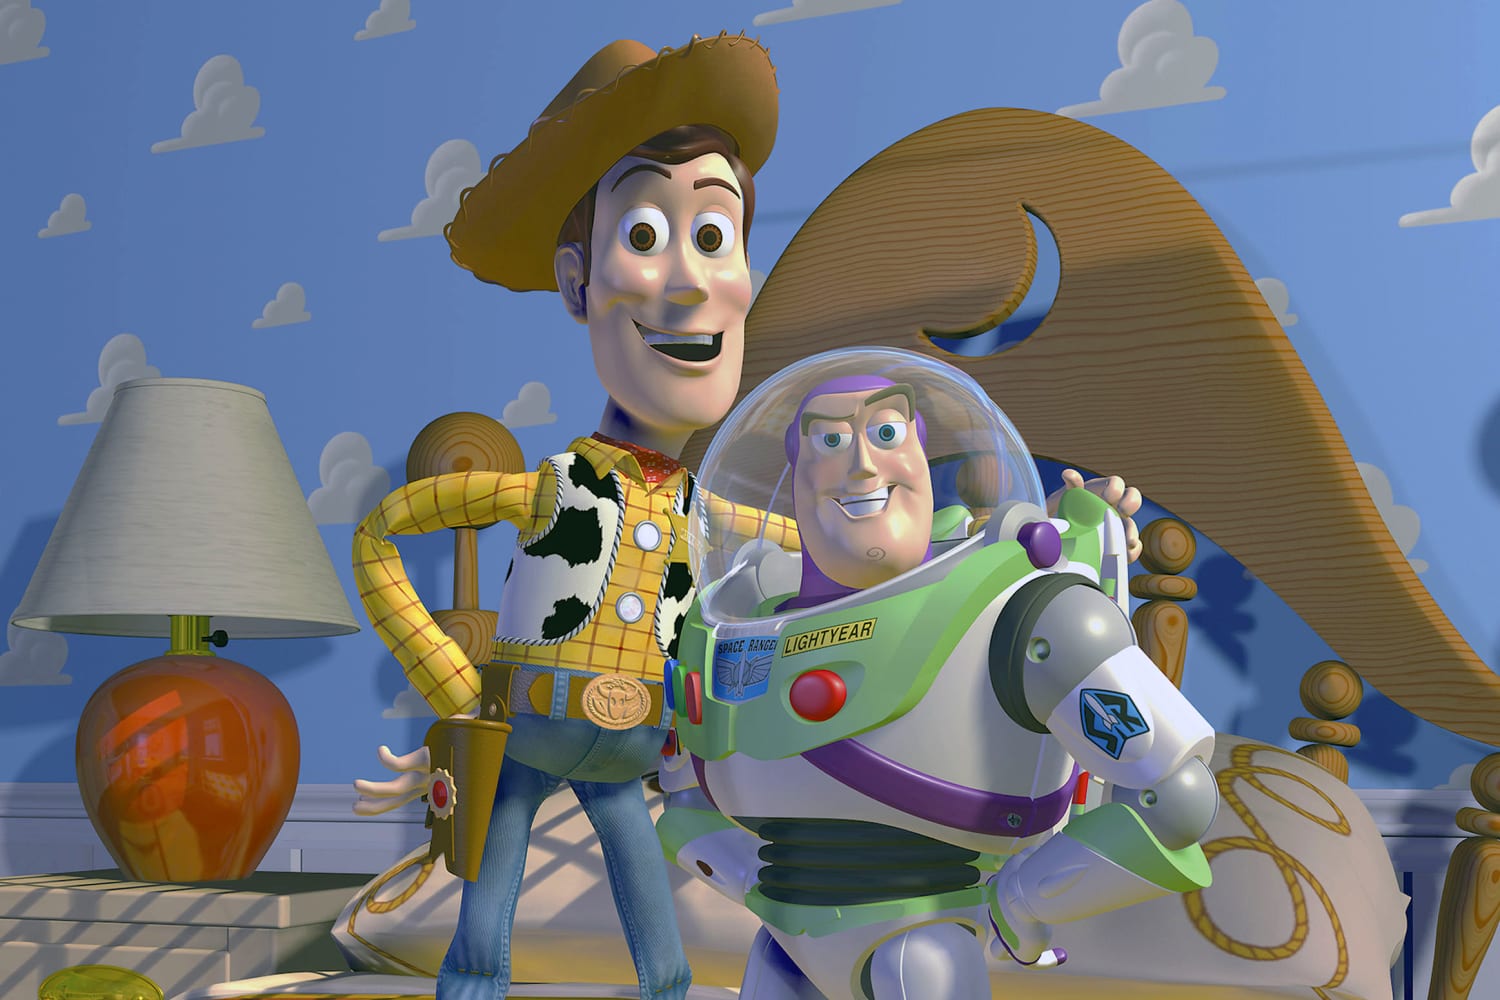 Toy Story 5', 'Frozen 3' and 'Zootopia 2' Announced During Earnings Call